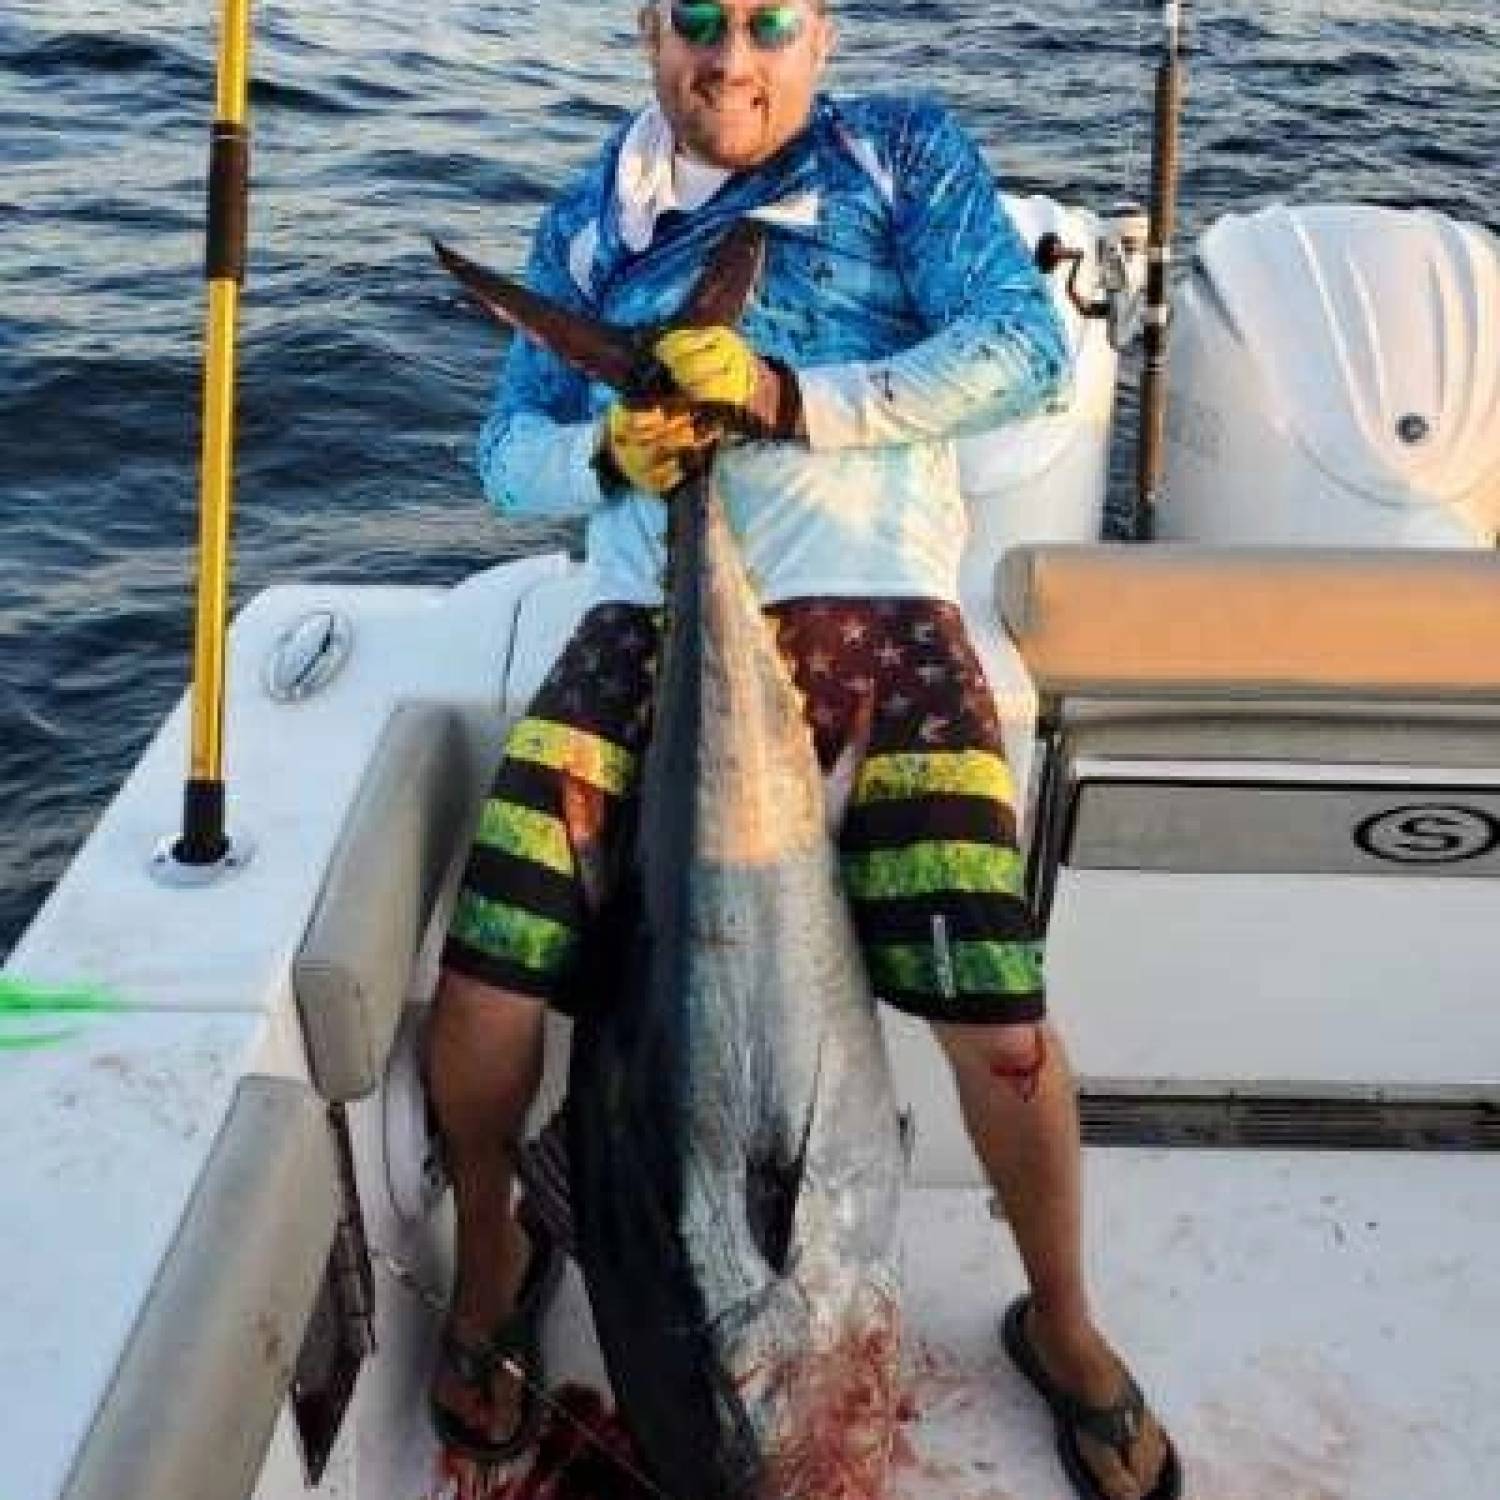 55 inch trolled bluefin tuna all alone on an inshore wreck. Barely fit in the fish box.